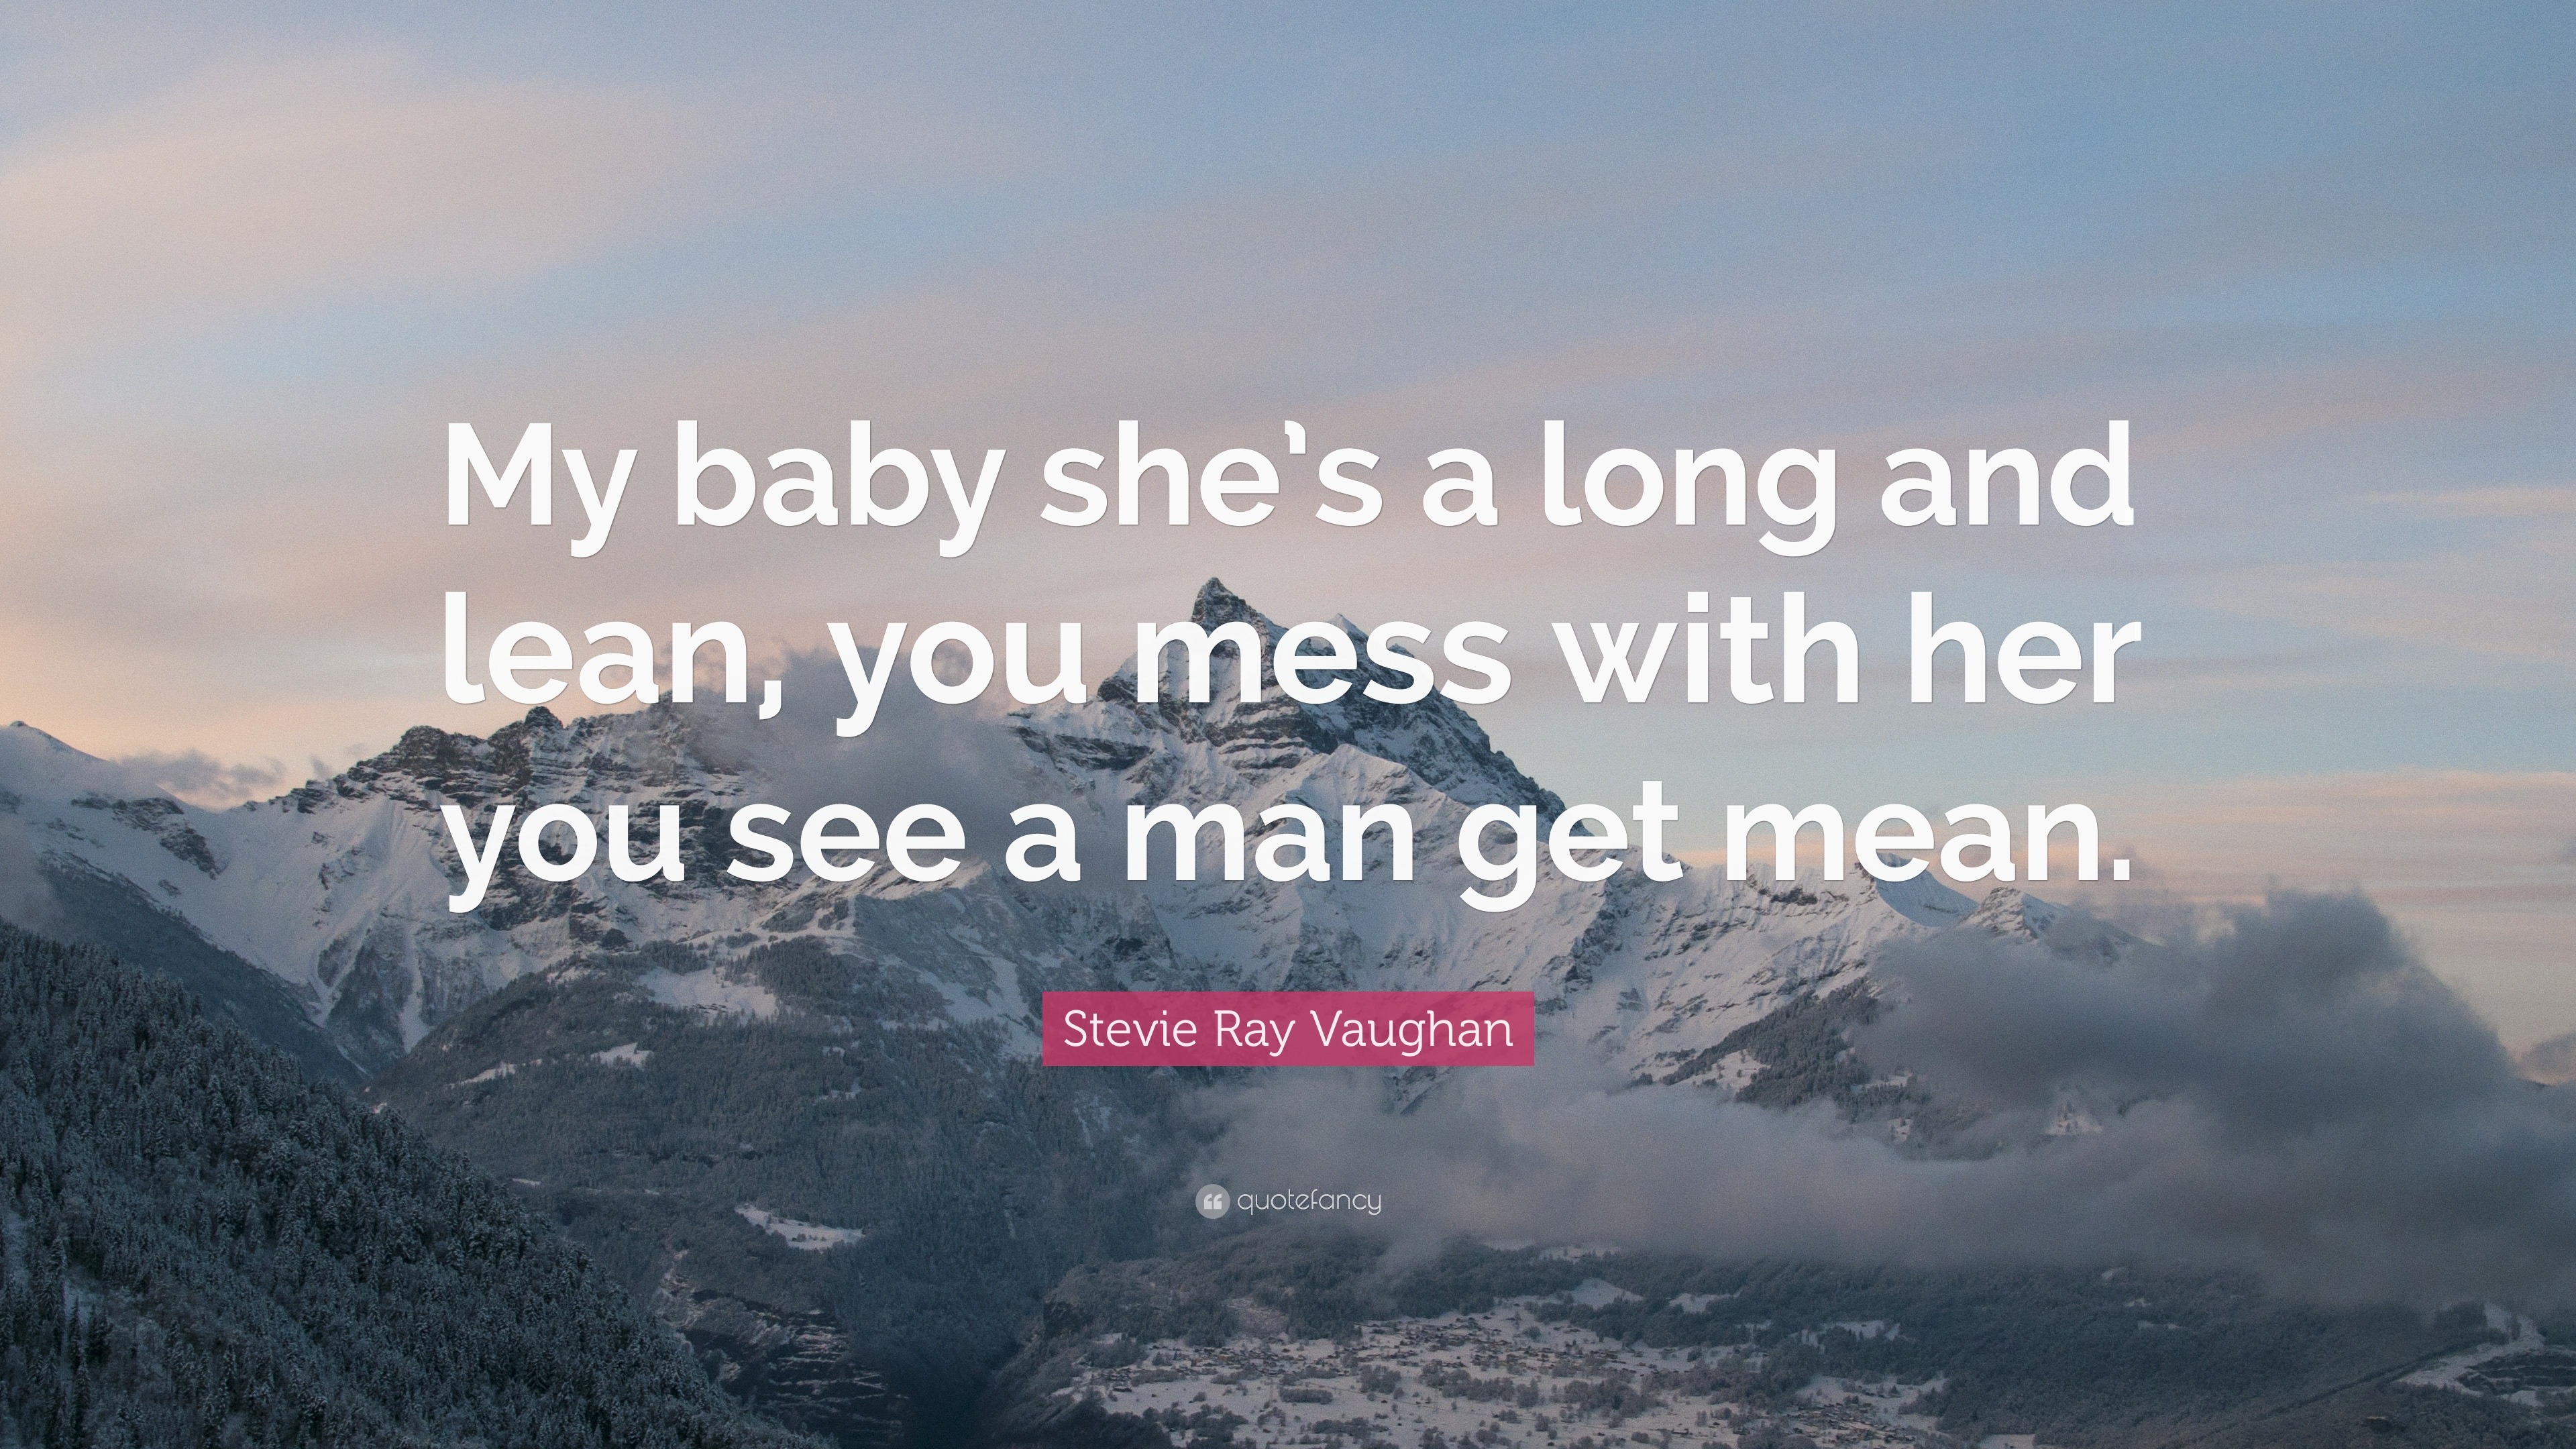 Stevie Ray Vaughan Quote: “My baby she’s a long and lean, you mess with ...